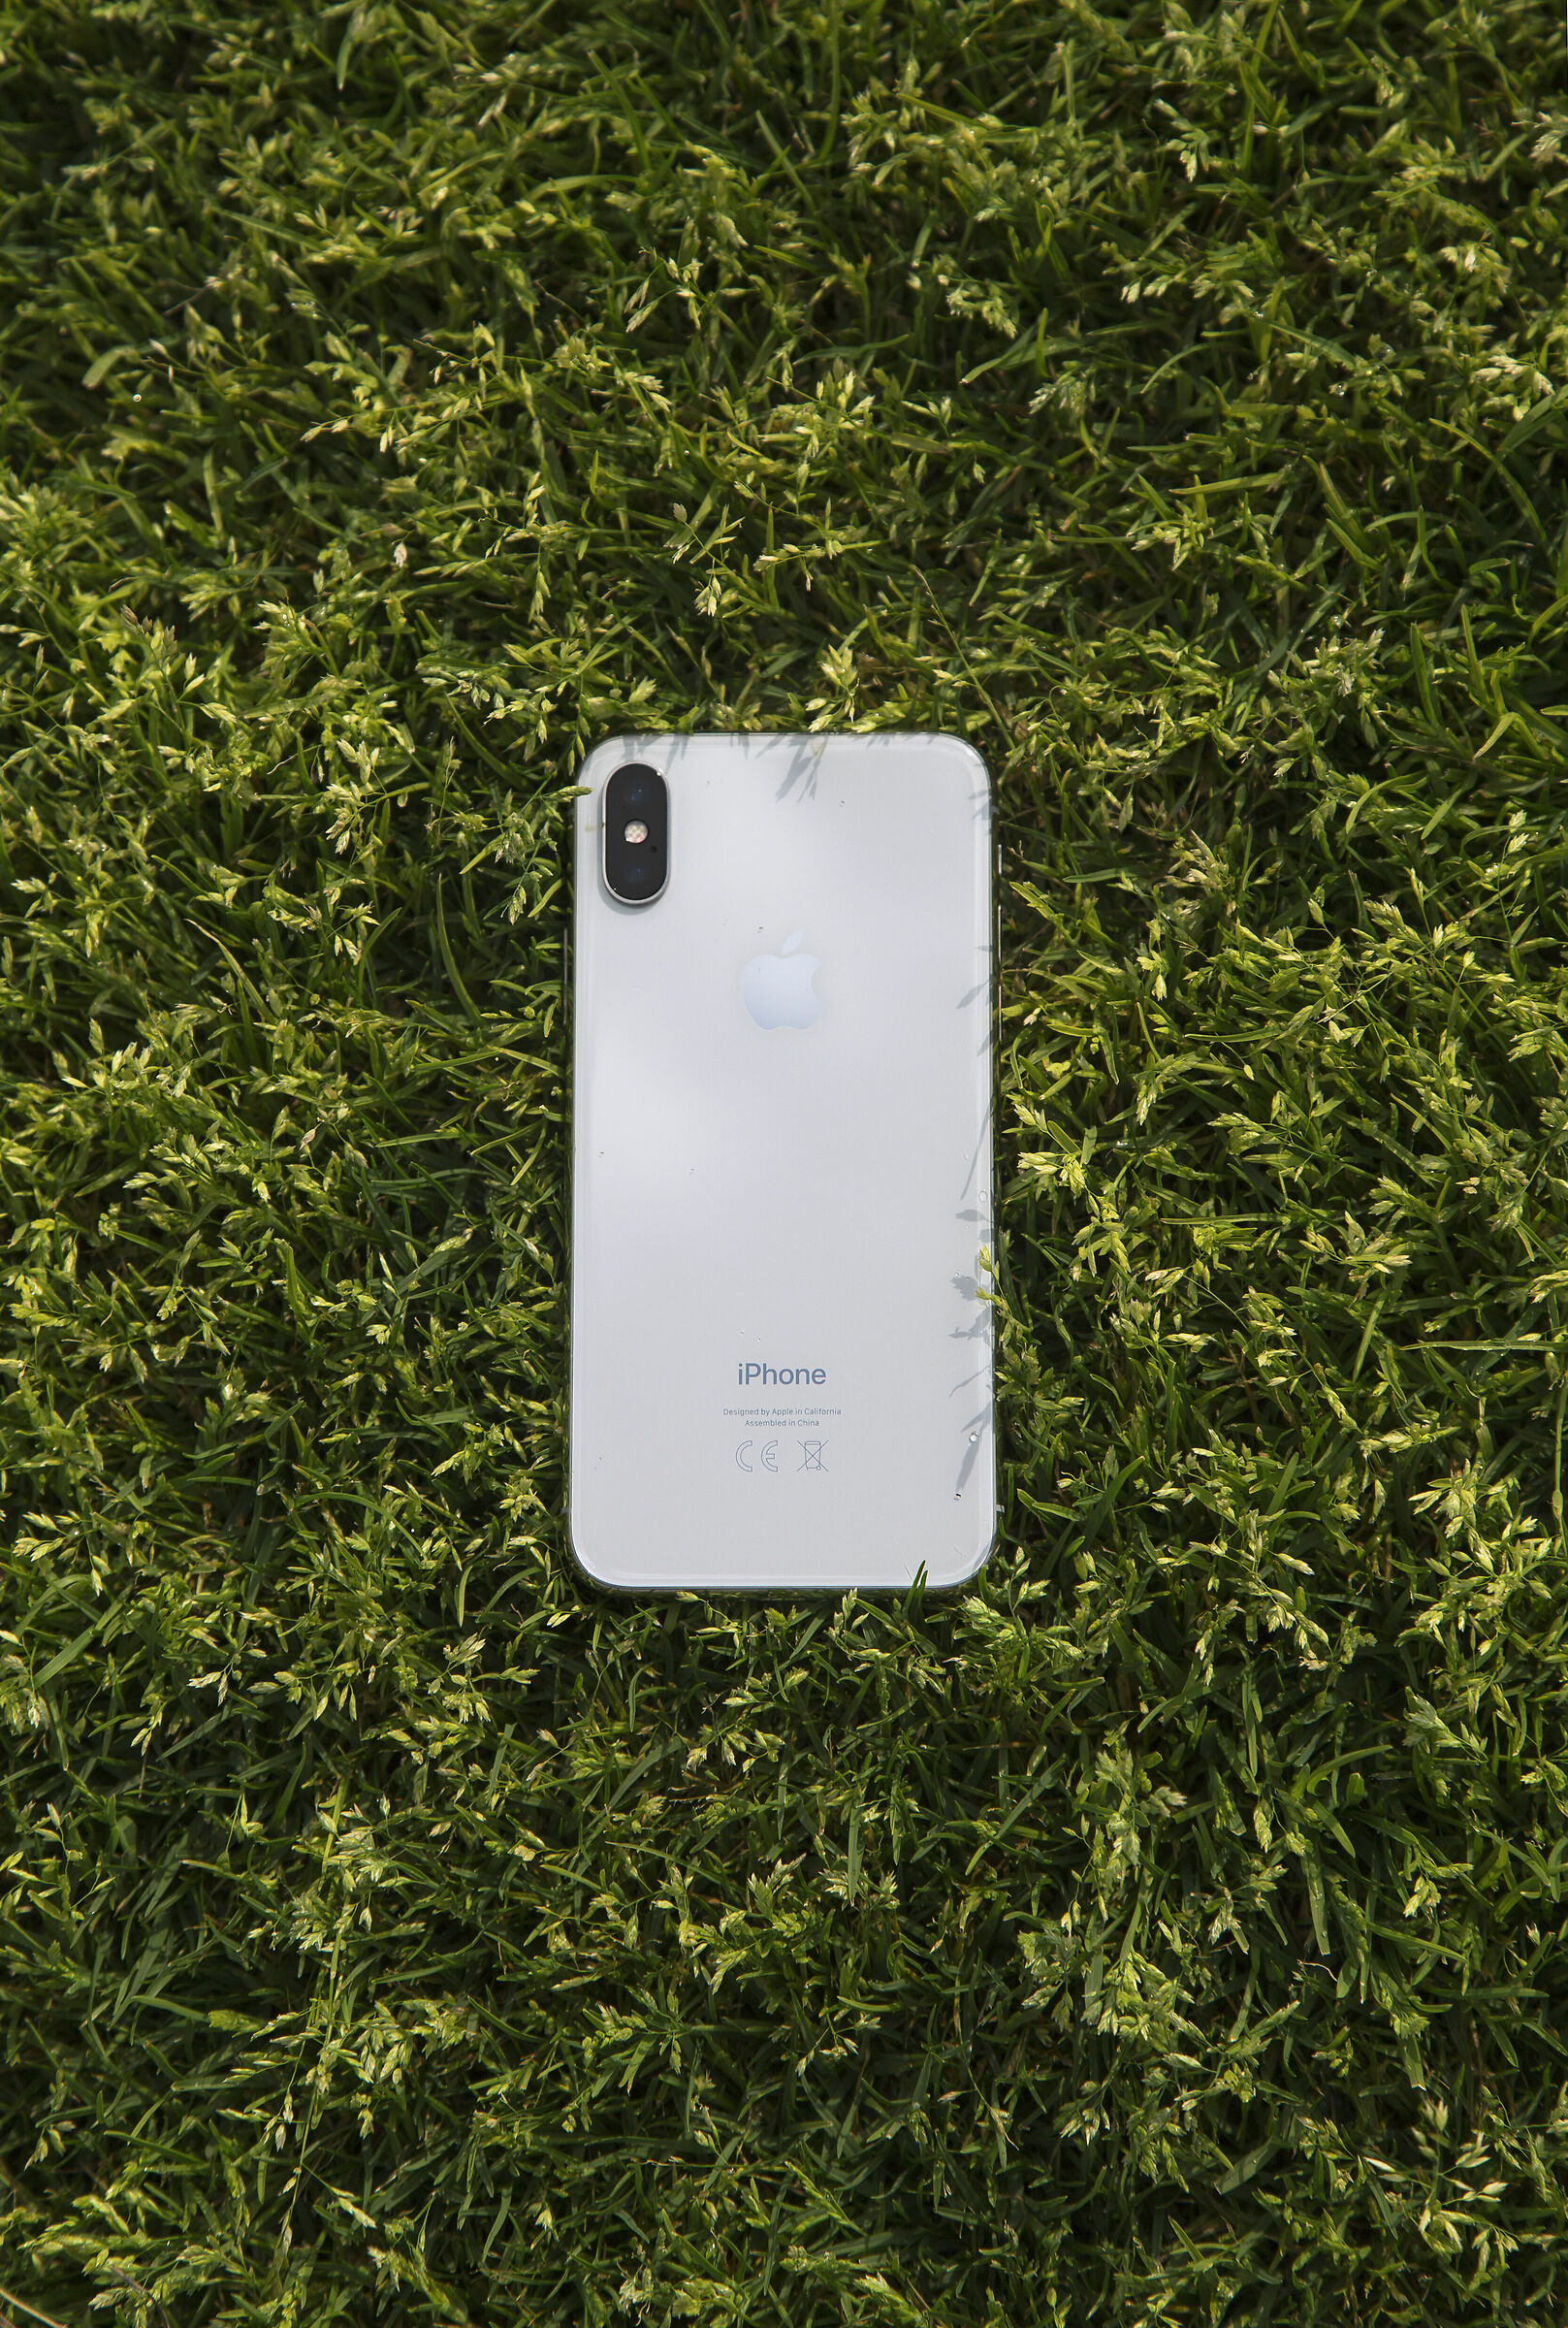 Iphone on the grass...